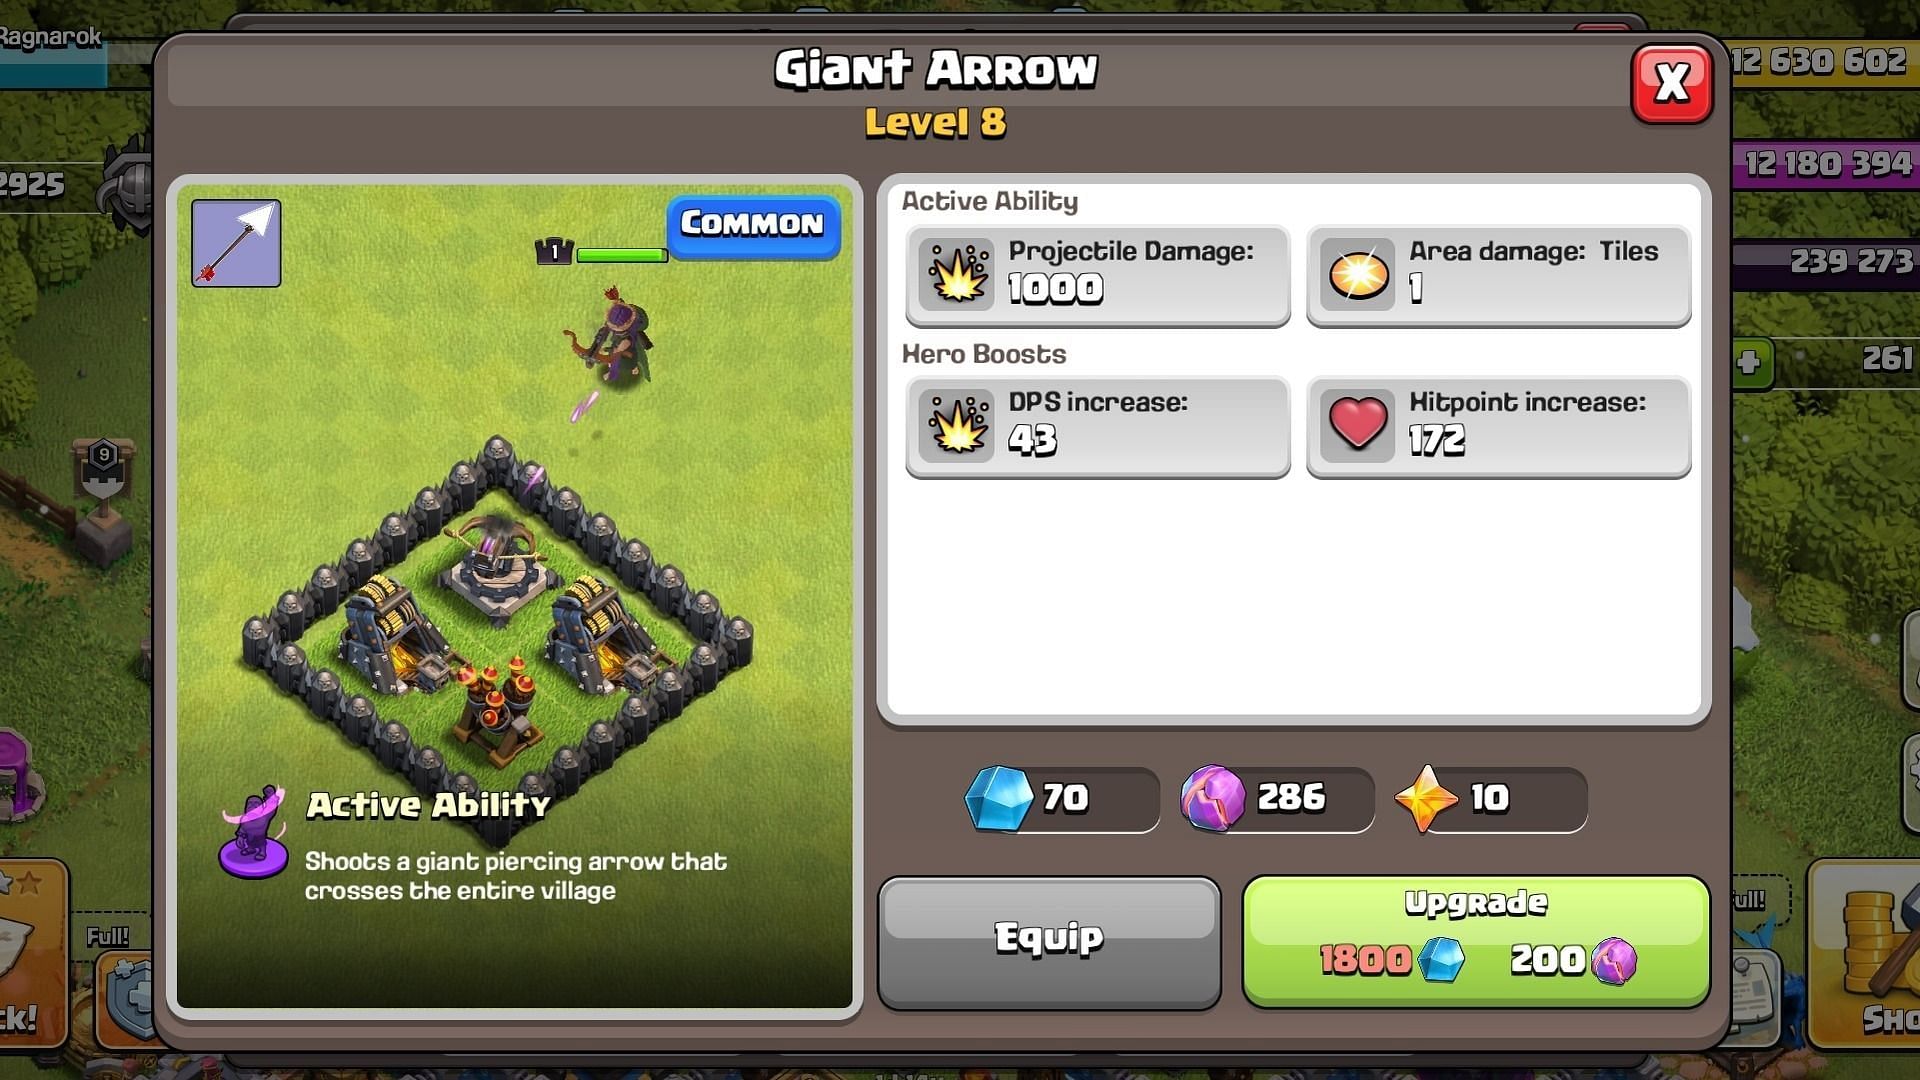 Clash of Clans Giant Arrow stats (Image via Supercell)